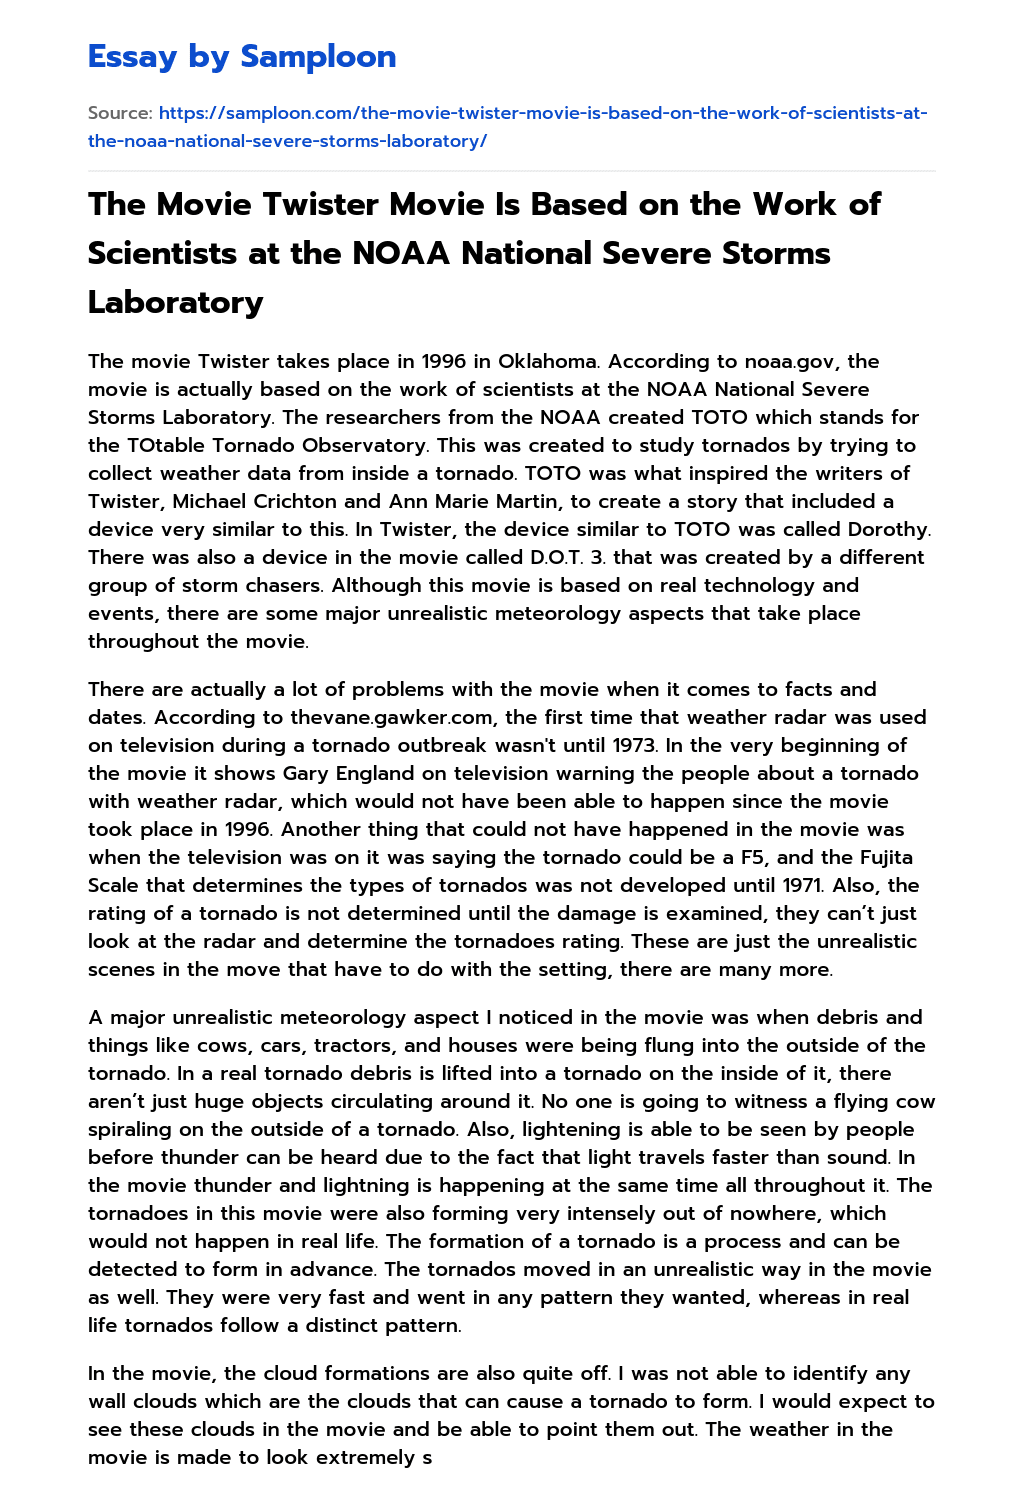 The Movie Twister Movie Is  Based on the Work of Scientists at the NOAA National Severe Storms Laboratory essay